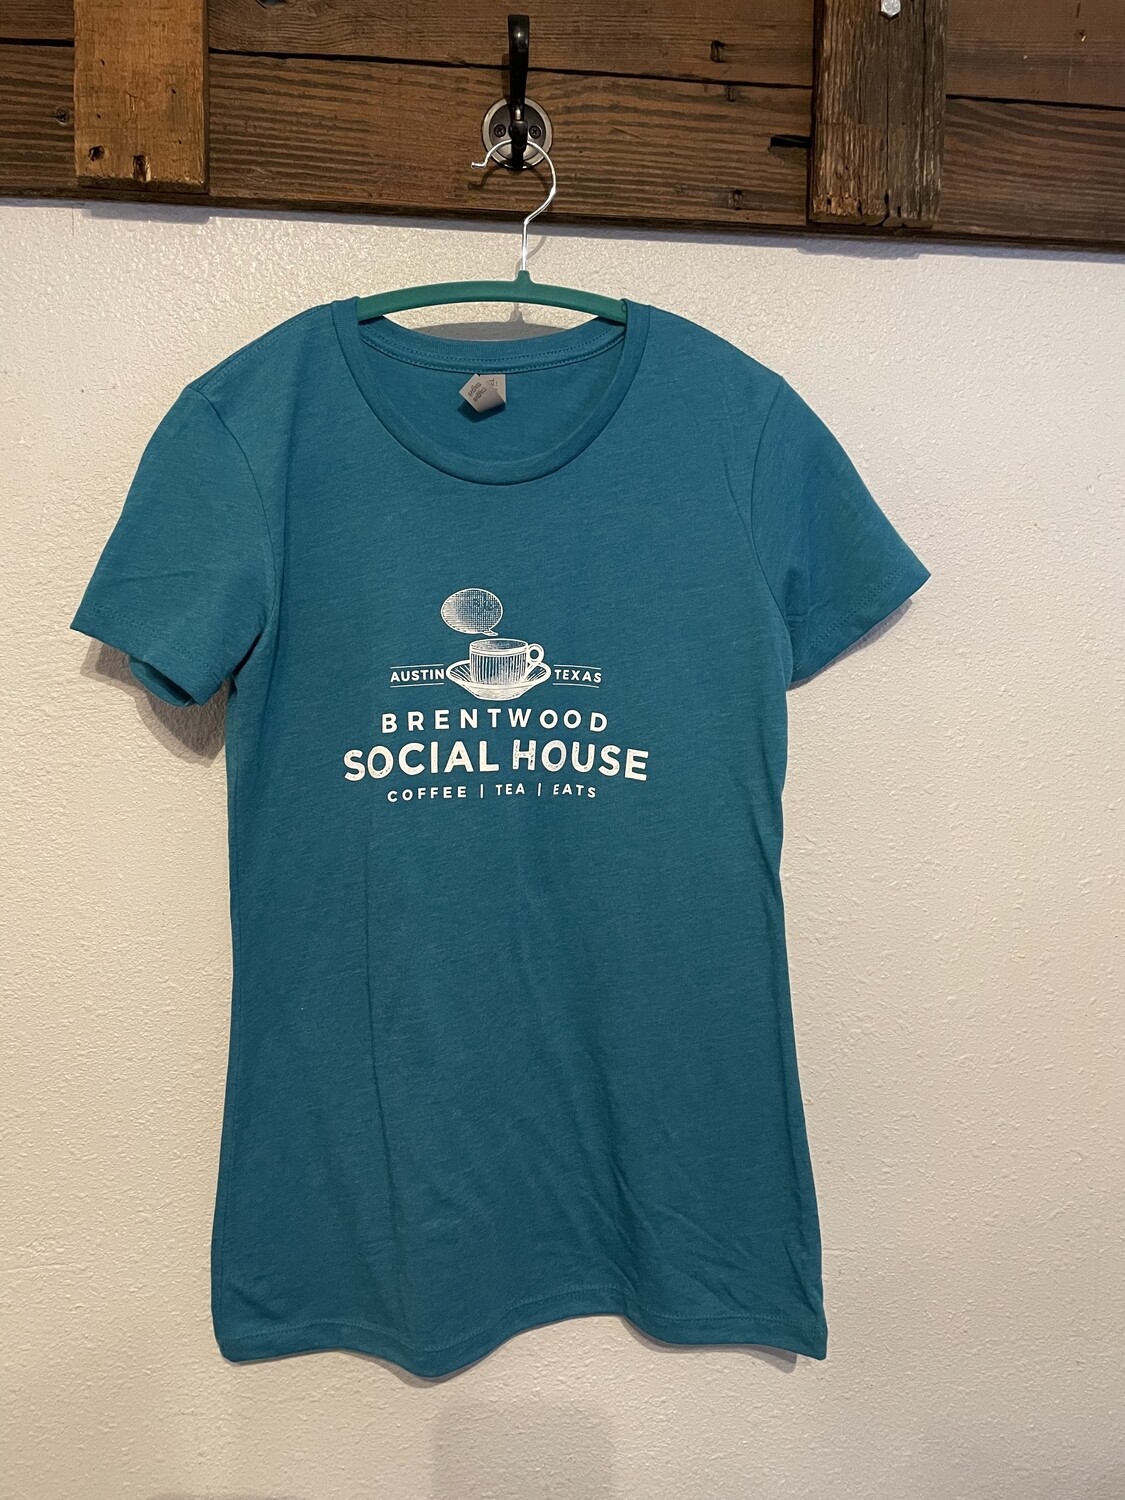 BSH T-shirt (Teal) - Fitted